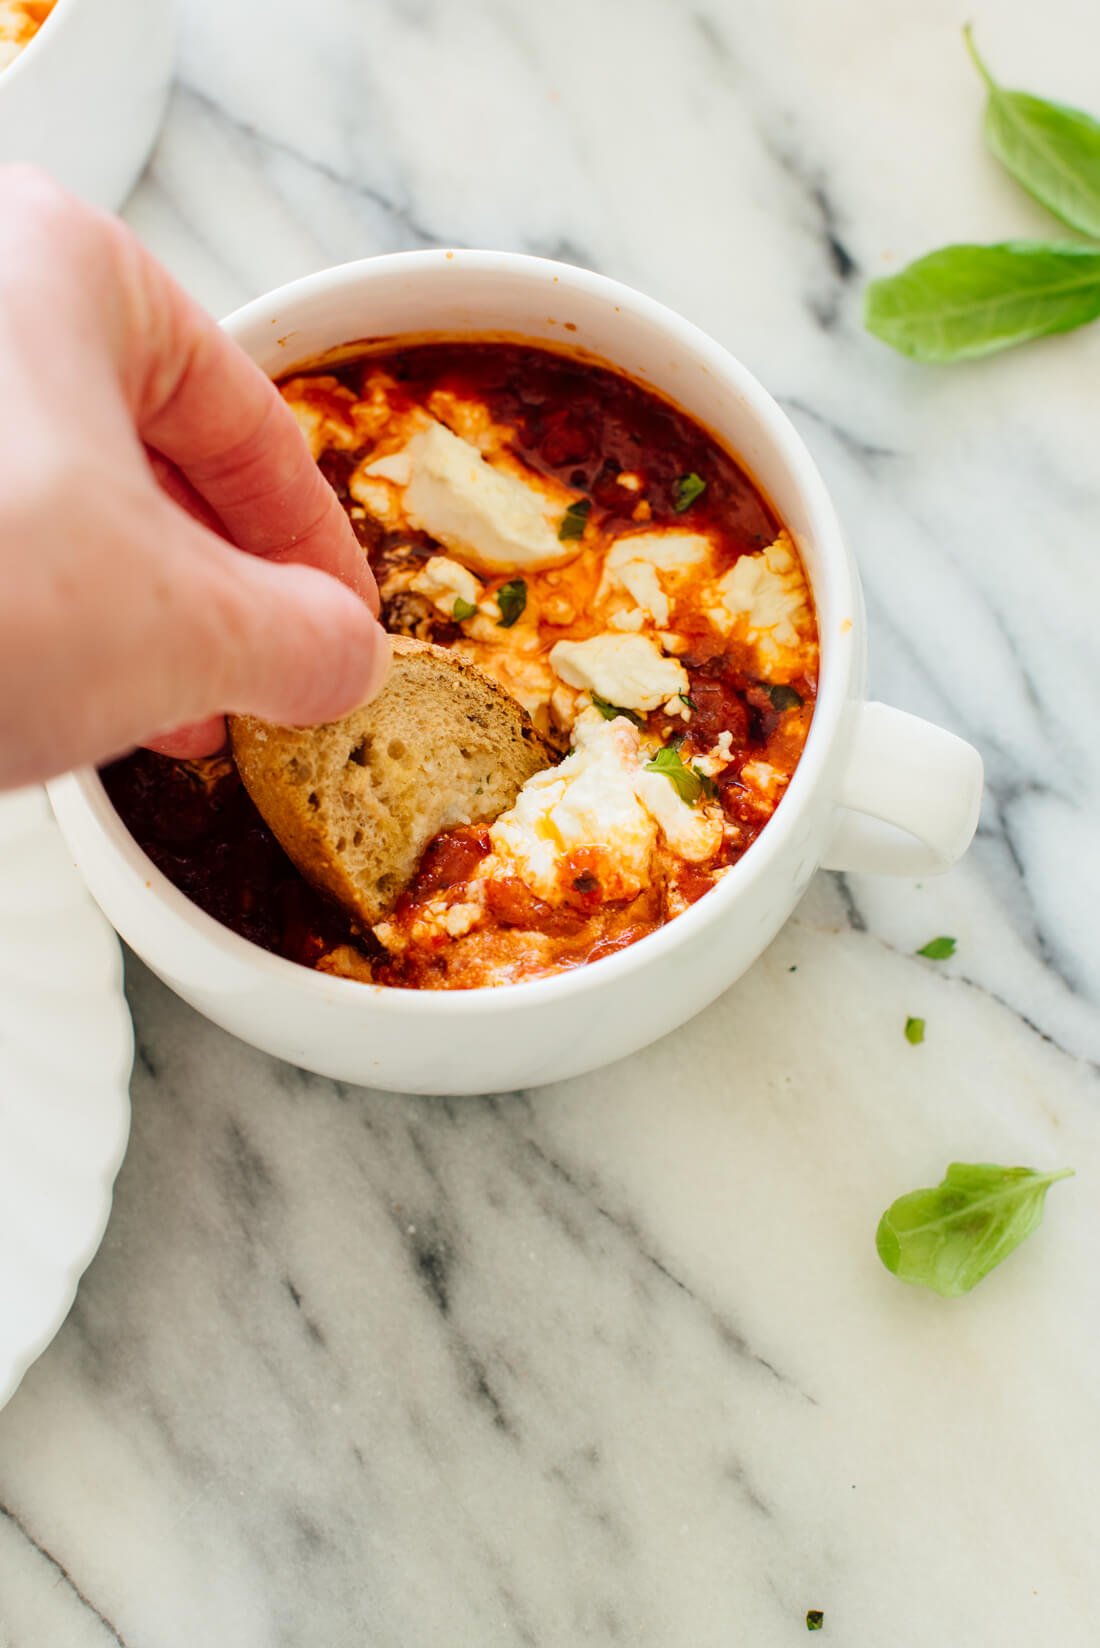 bread dipped into baked tomato and goat cheese dip